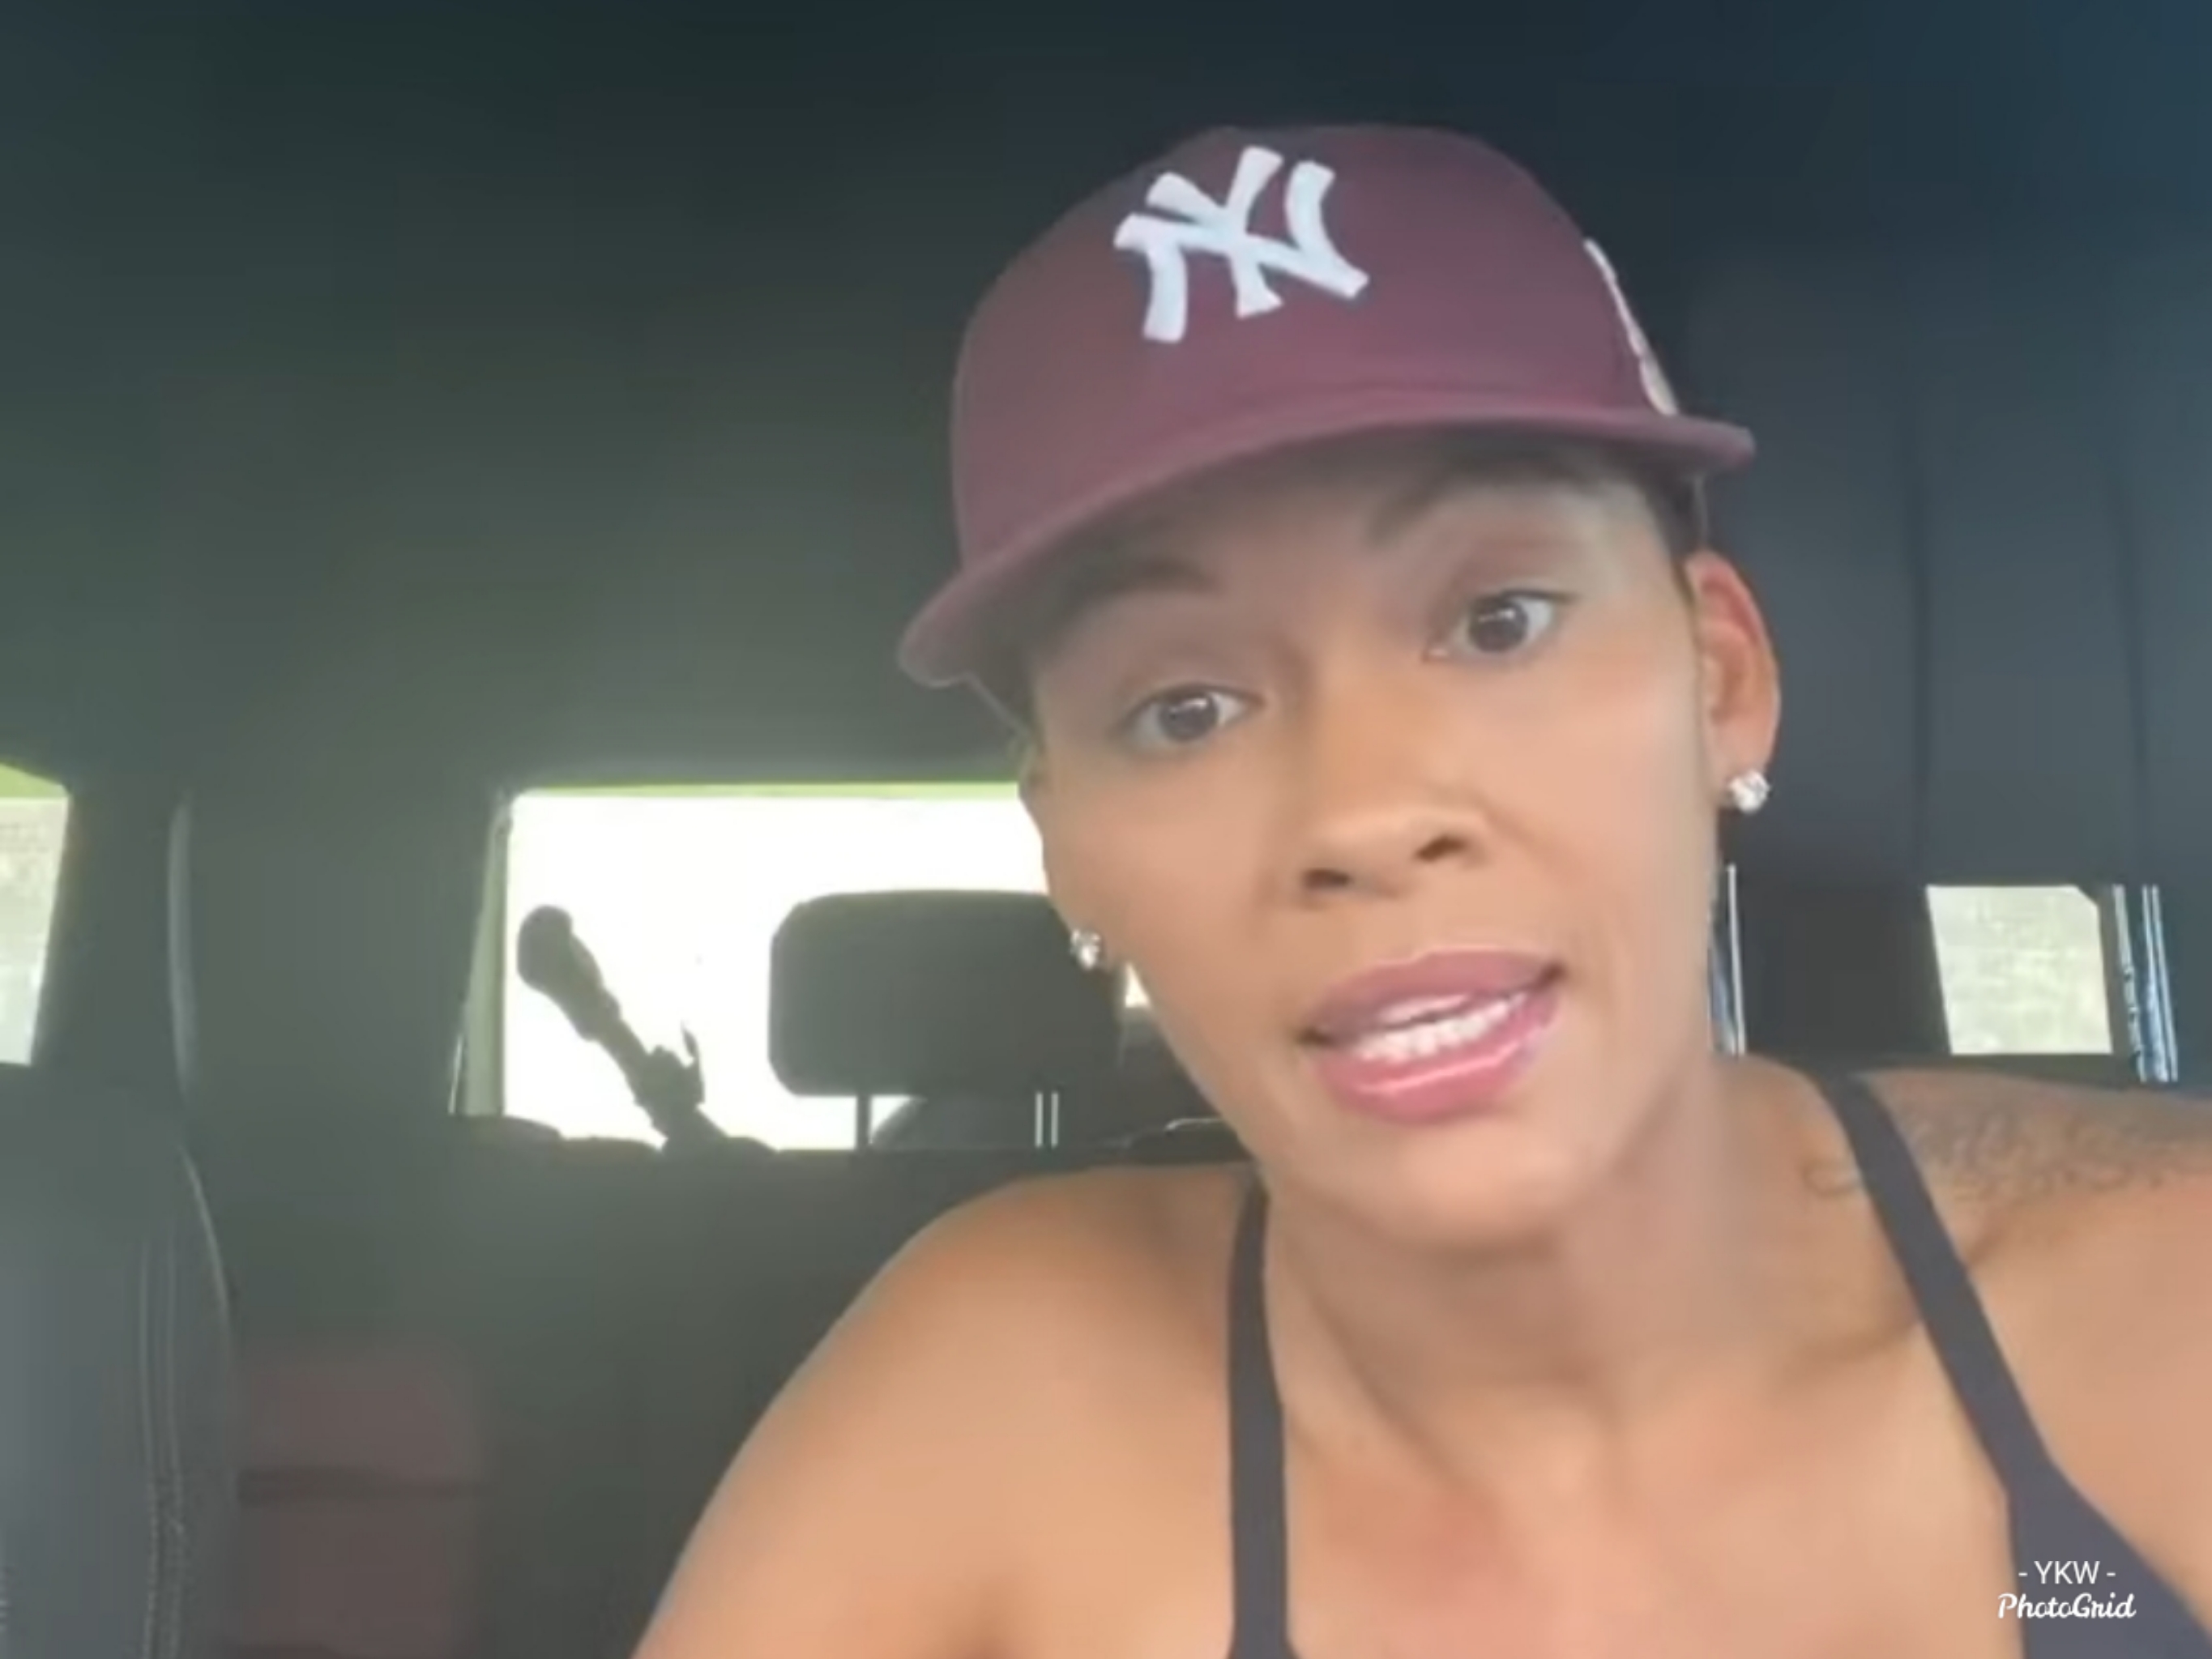 Evelyn Lozada Shuts Down Rumors: “Carl Never Put His Hands On Me”